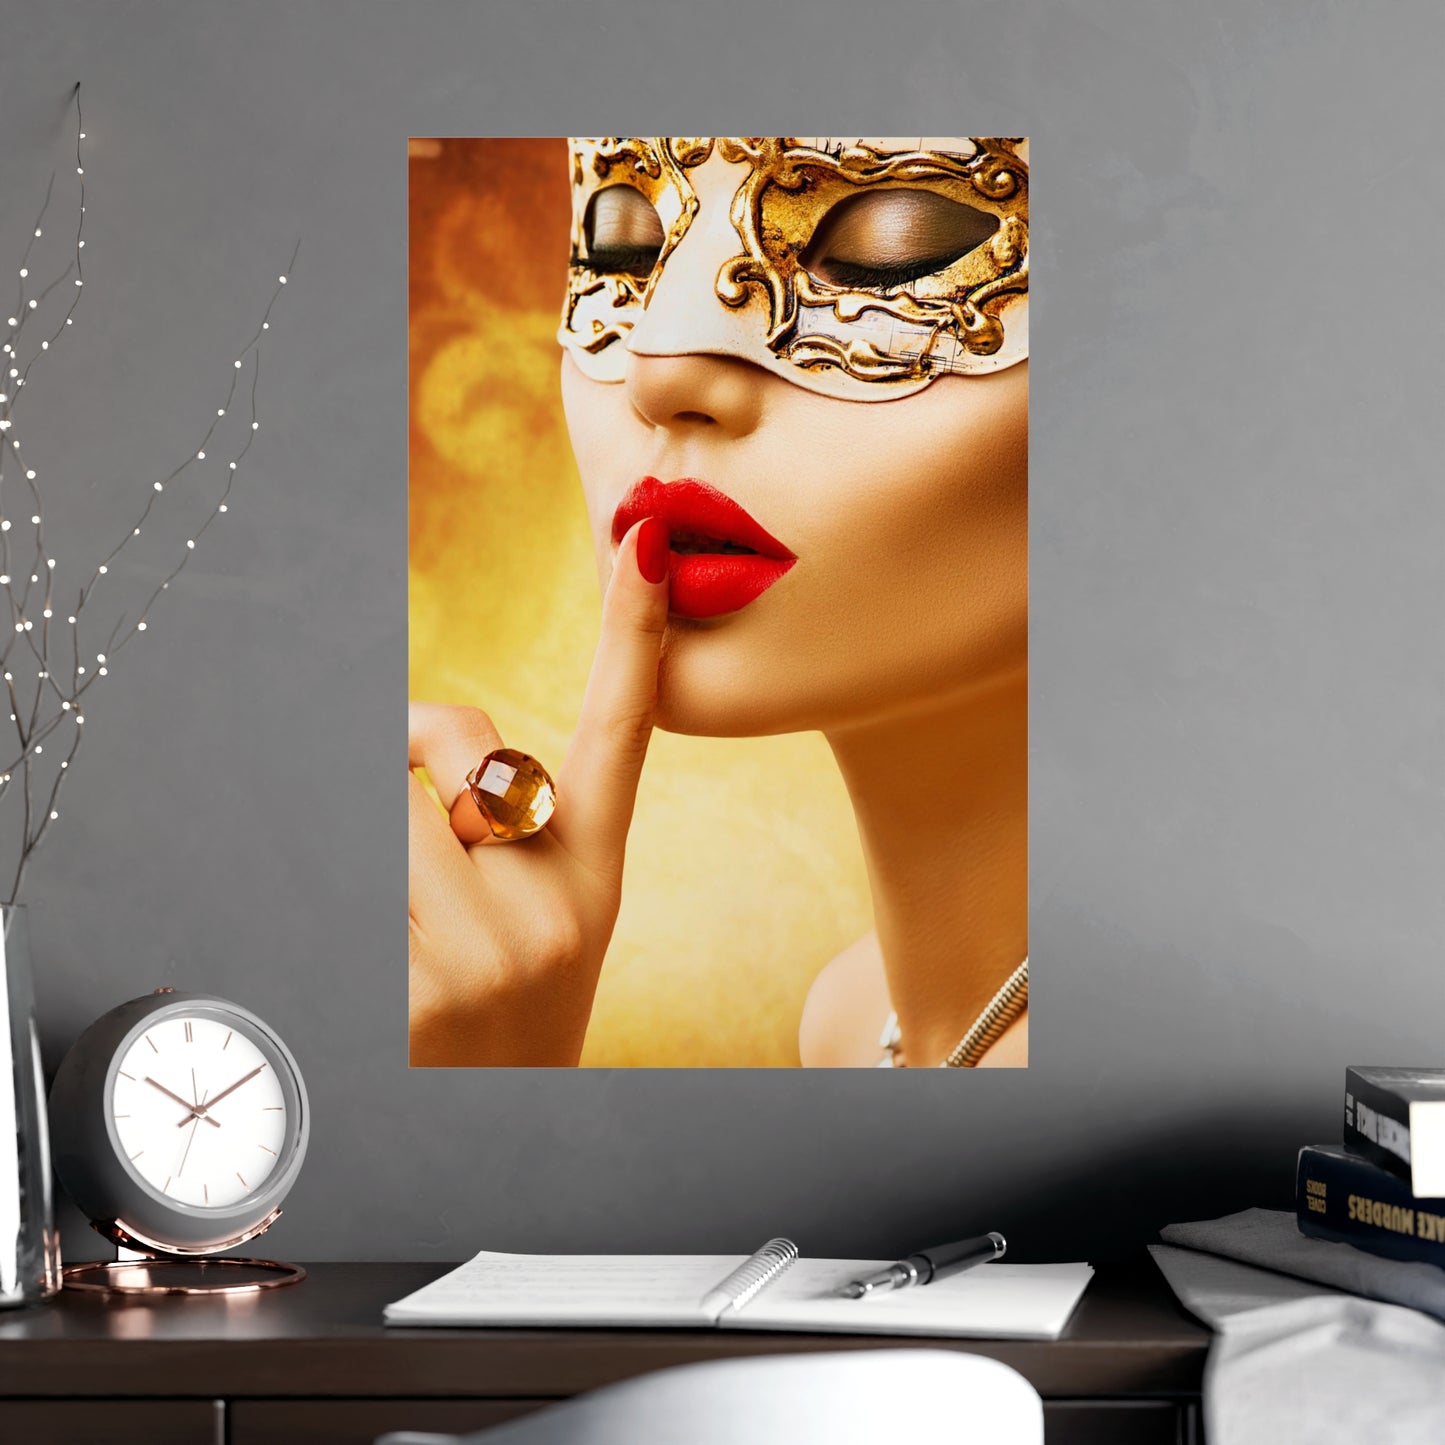 Posters - Sexy Lips - Vertical Matte Posters - 25